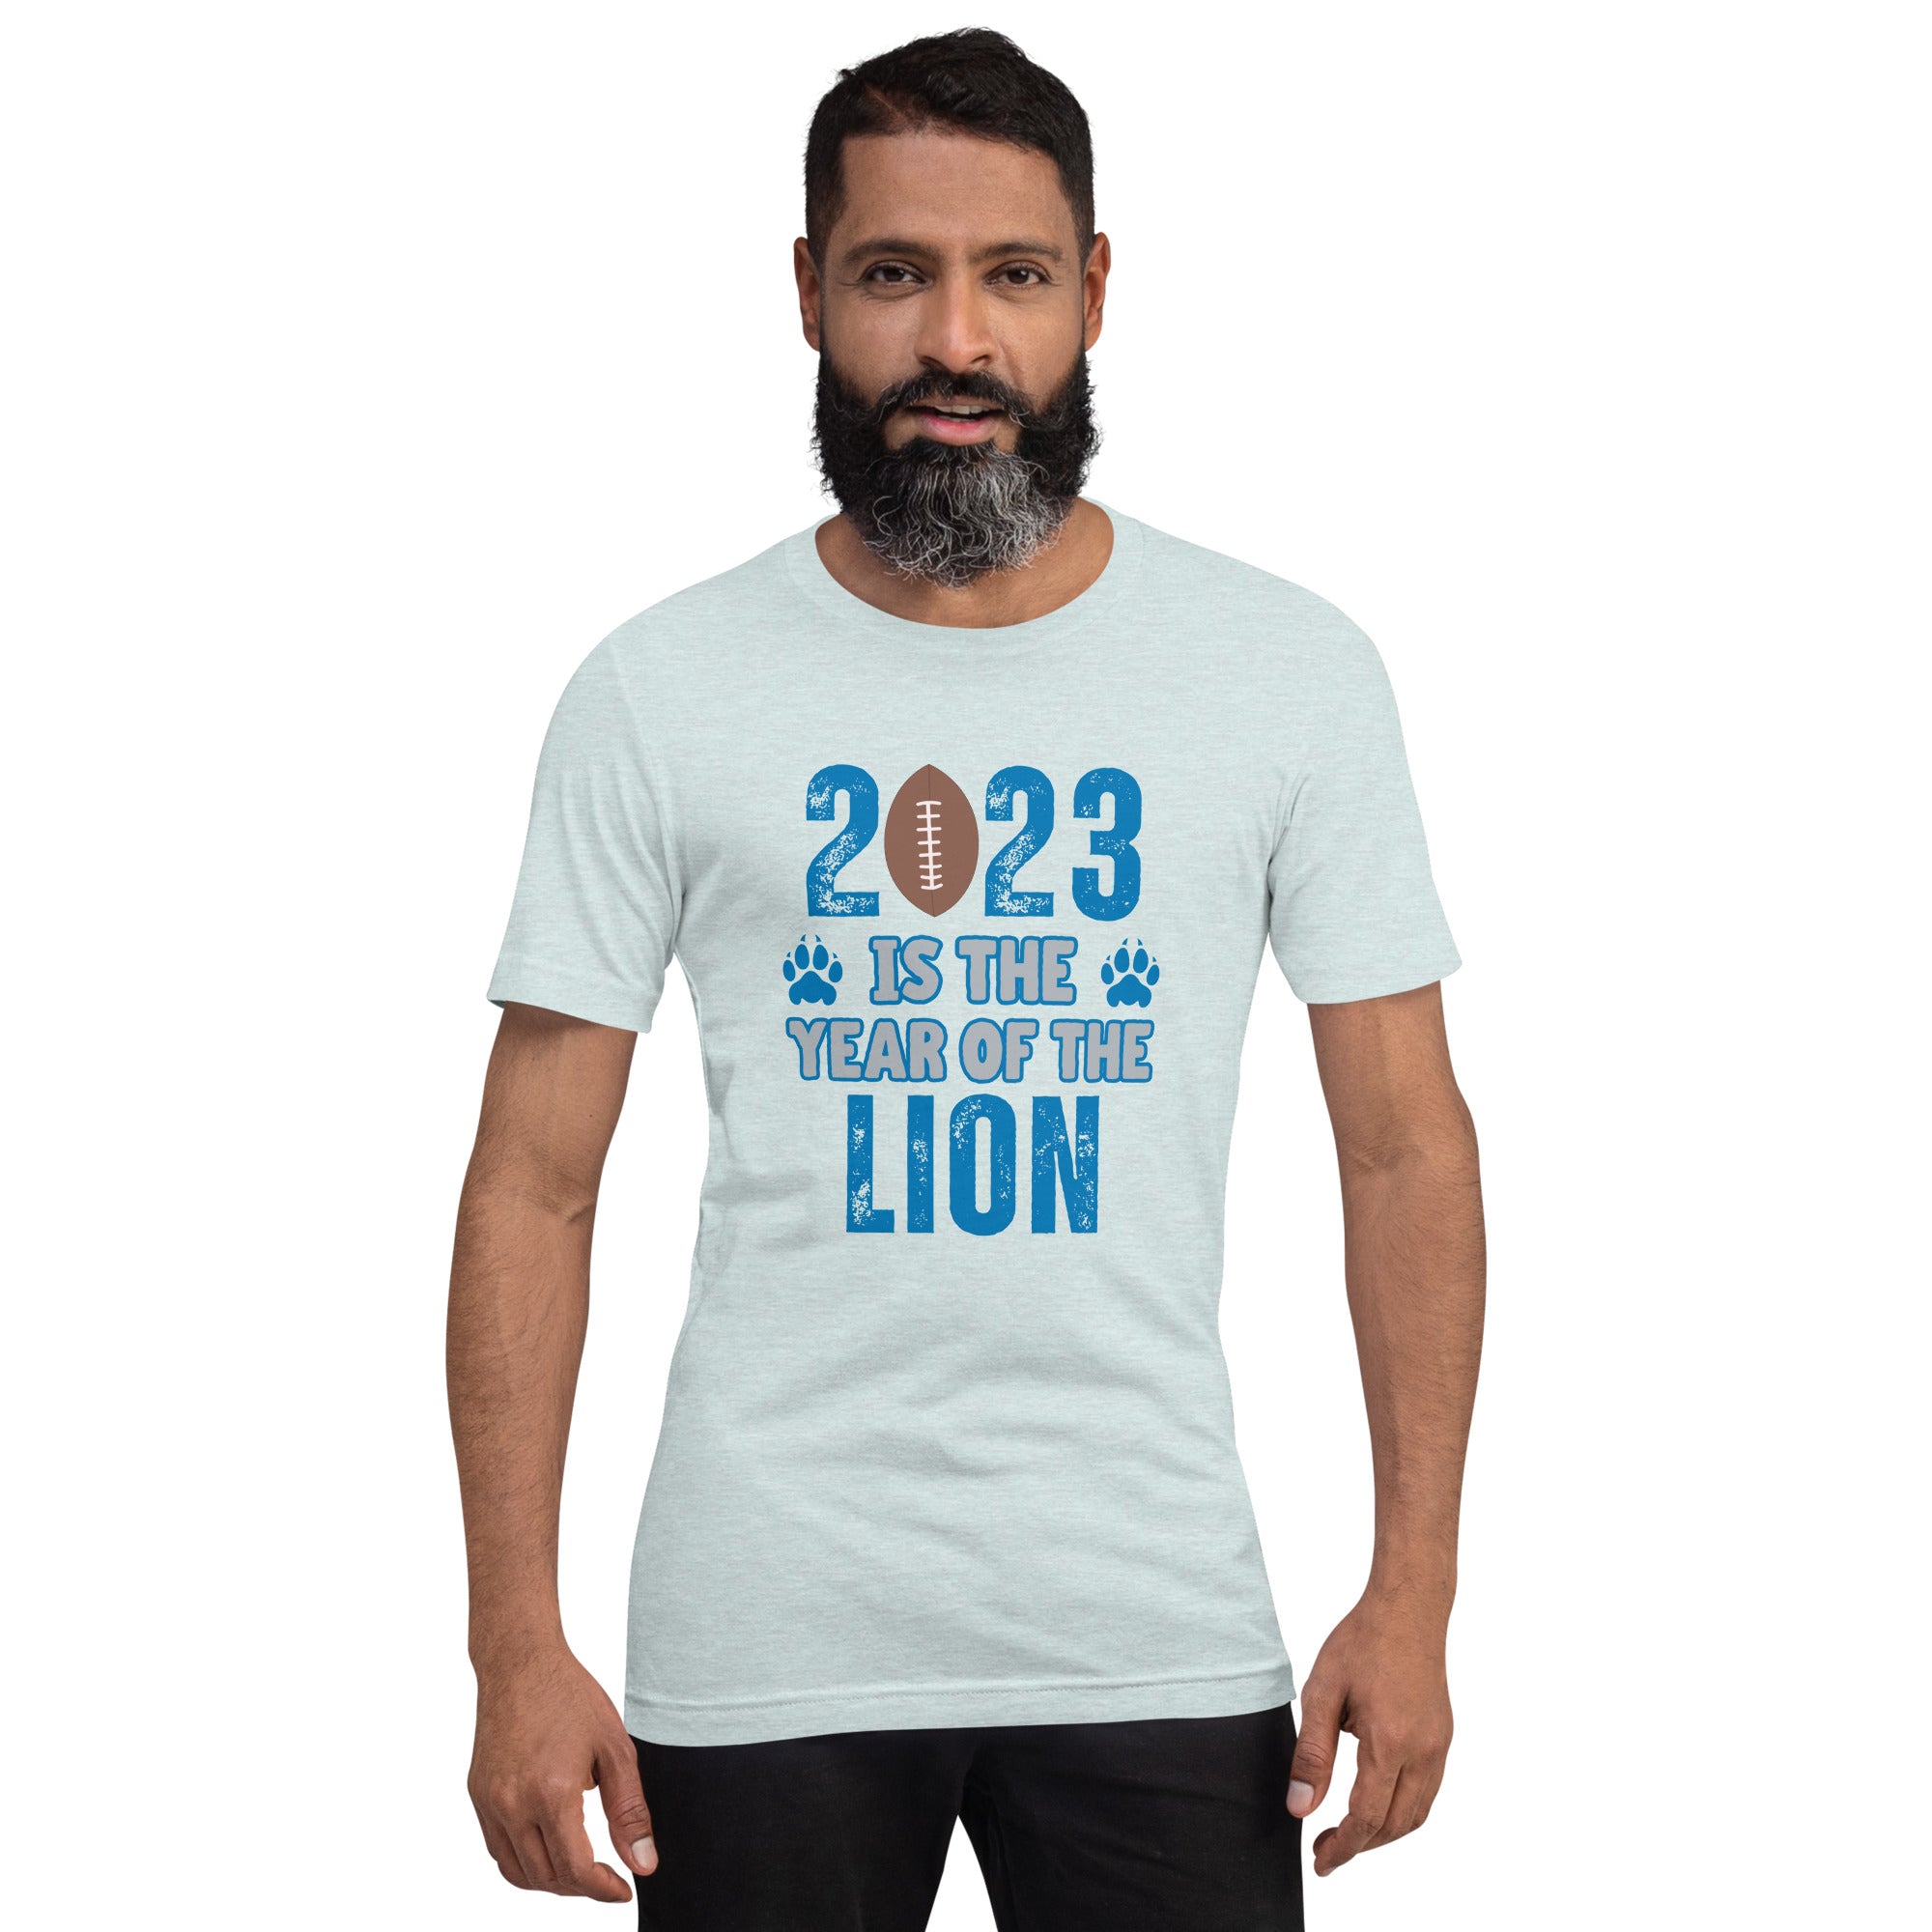 2023 is the Year of the Lion T-Shirt for Detroit Football Fans